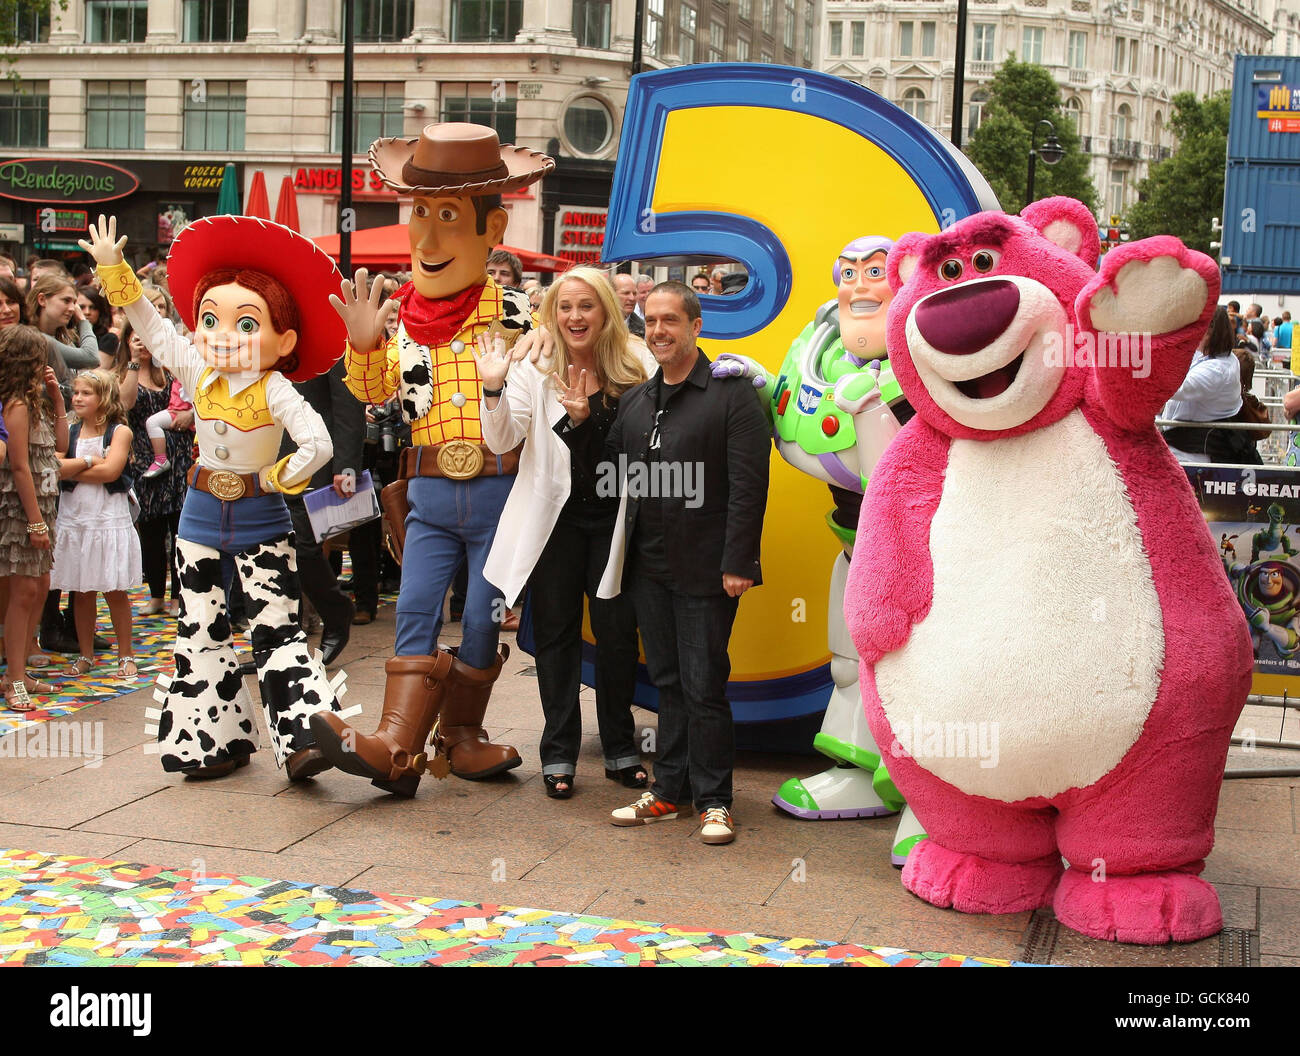 Producer Karia K Anderson (3rd left) and director Lee Unkrich (4th left) with Toy Story characters at the UK premiere of Toy Story 3 in Leicester Square, central London. Stock Photo